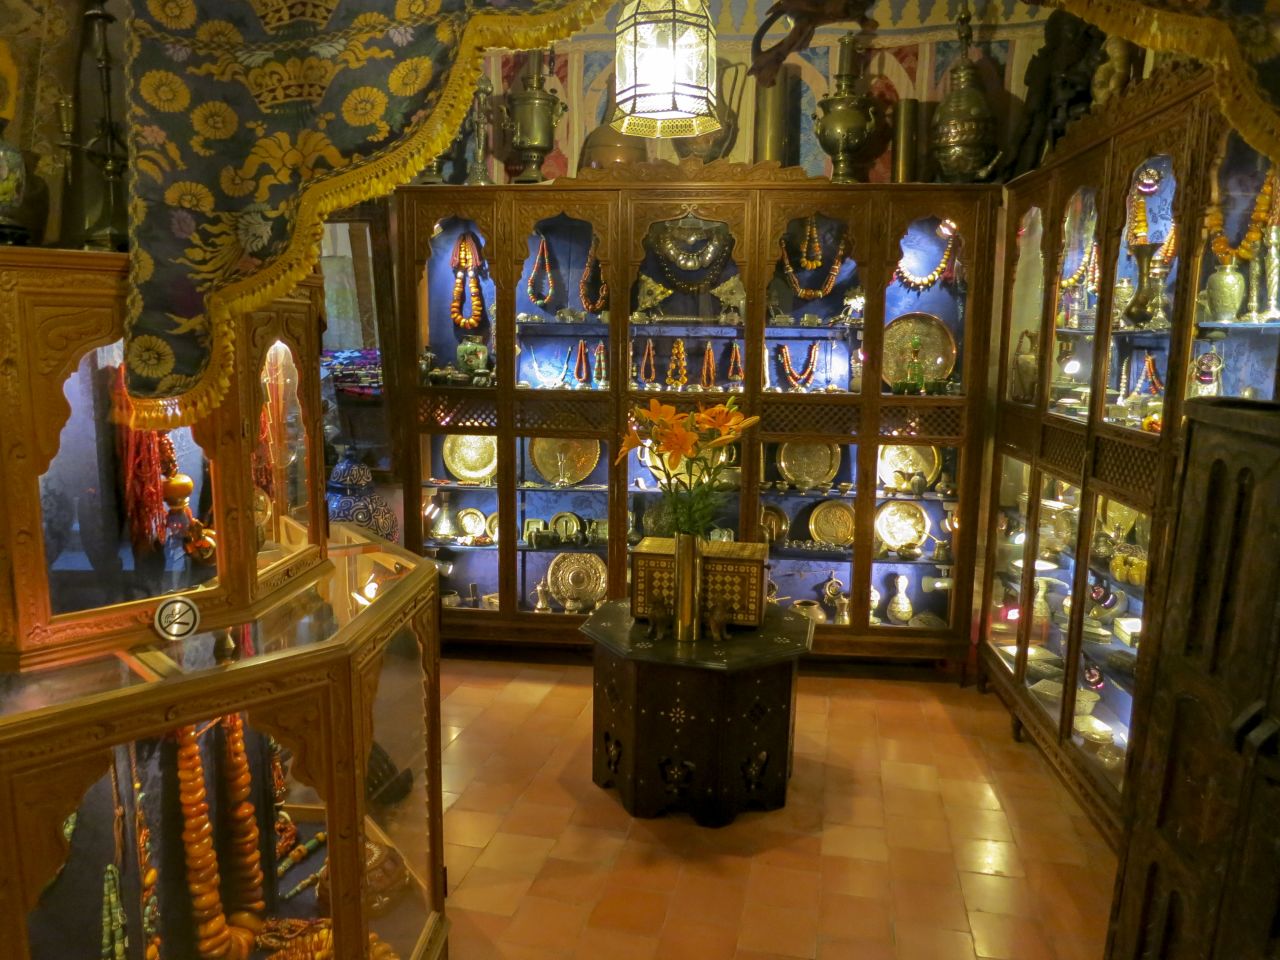 A view of the collection at Boutique Majid, an antique shop in Tangier.